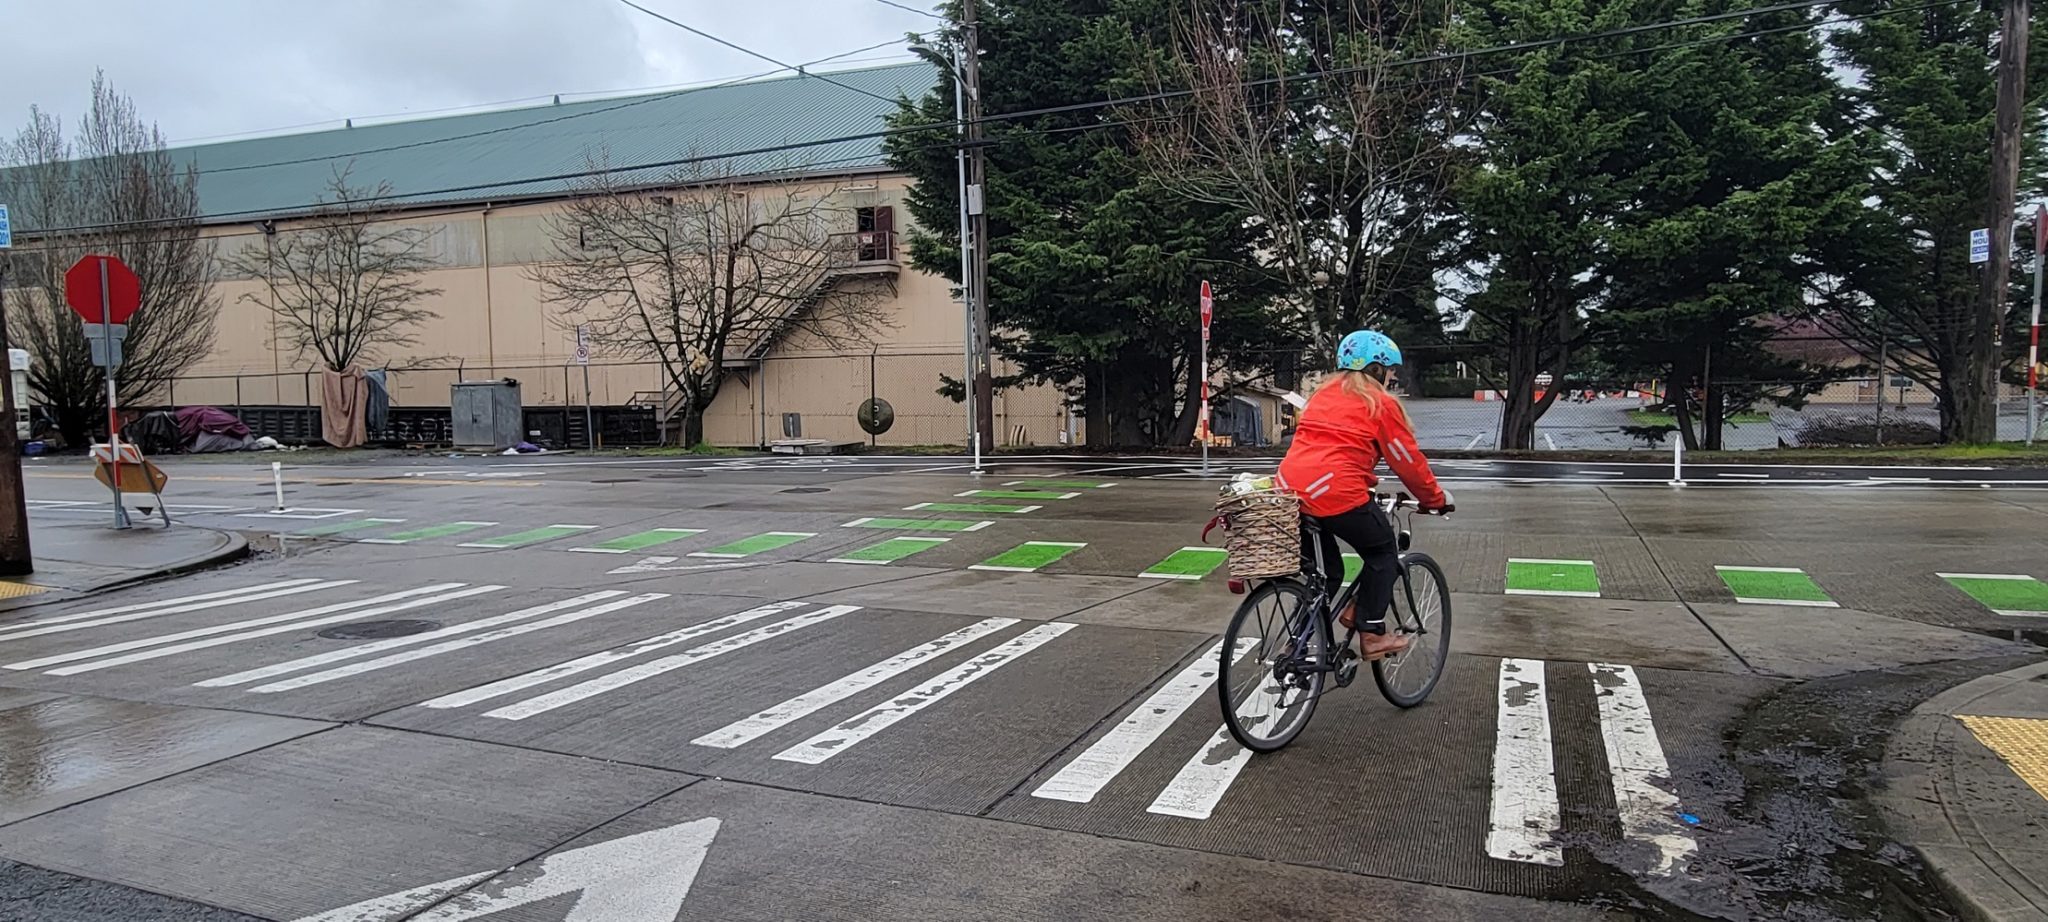 A bicyclist turns right onto Delridge Way SW. The biker is wearing a red jacket and light blue helmet. They have a small basket on the back on their bicycle. Several trees and a large building are visible in the background.